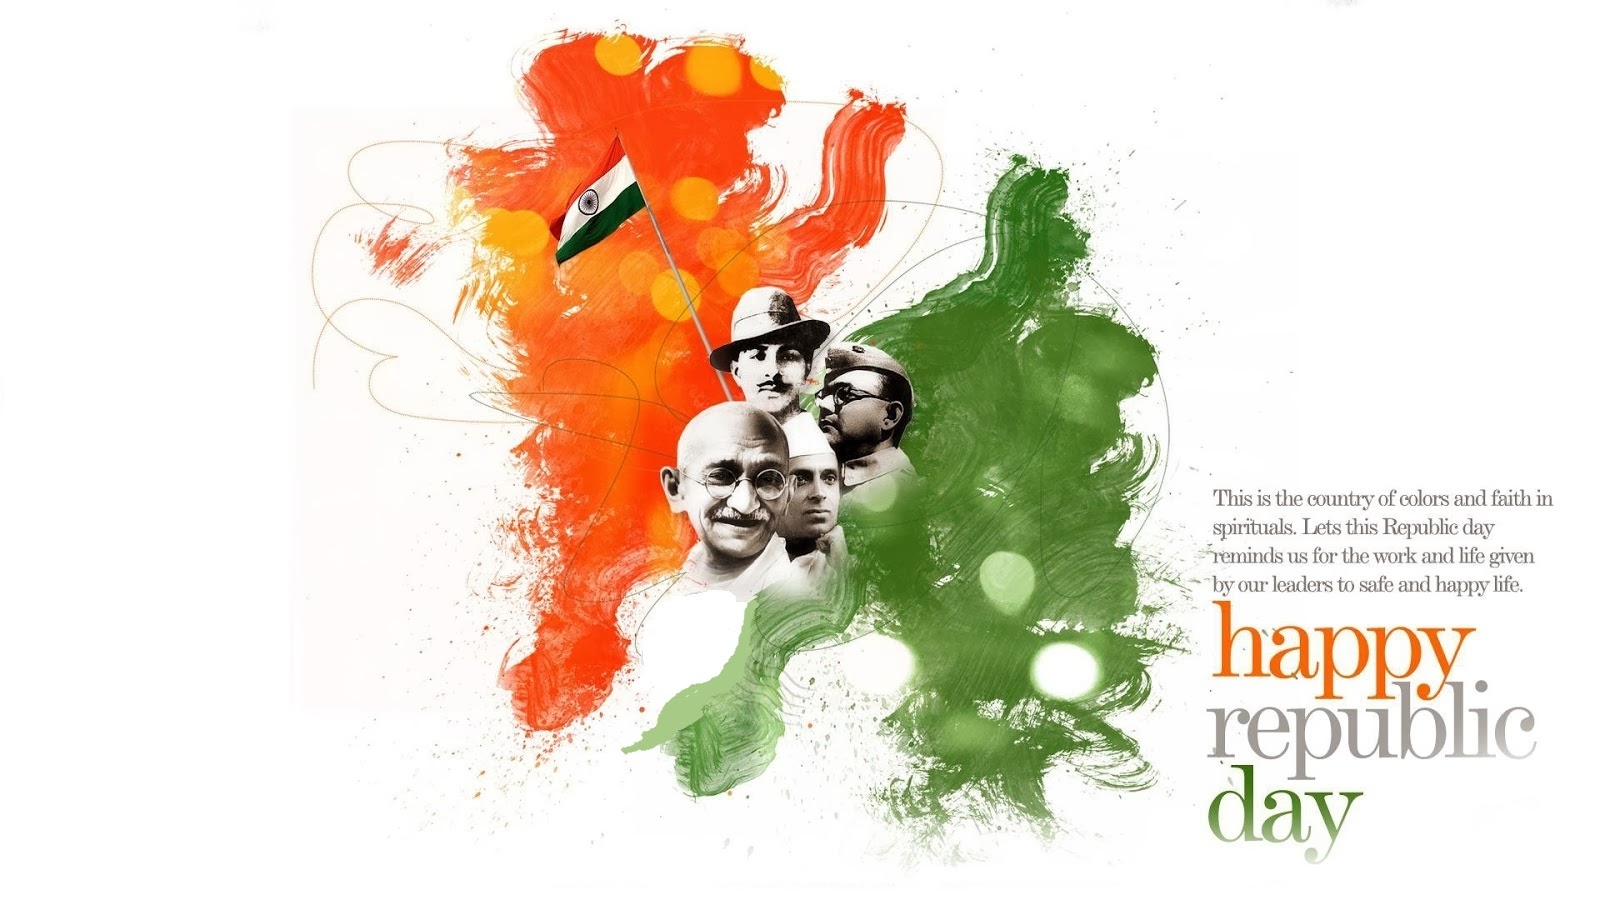 Happy Republic Day 2014.HD Wallpapers and Pics.nice one!!!!!